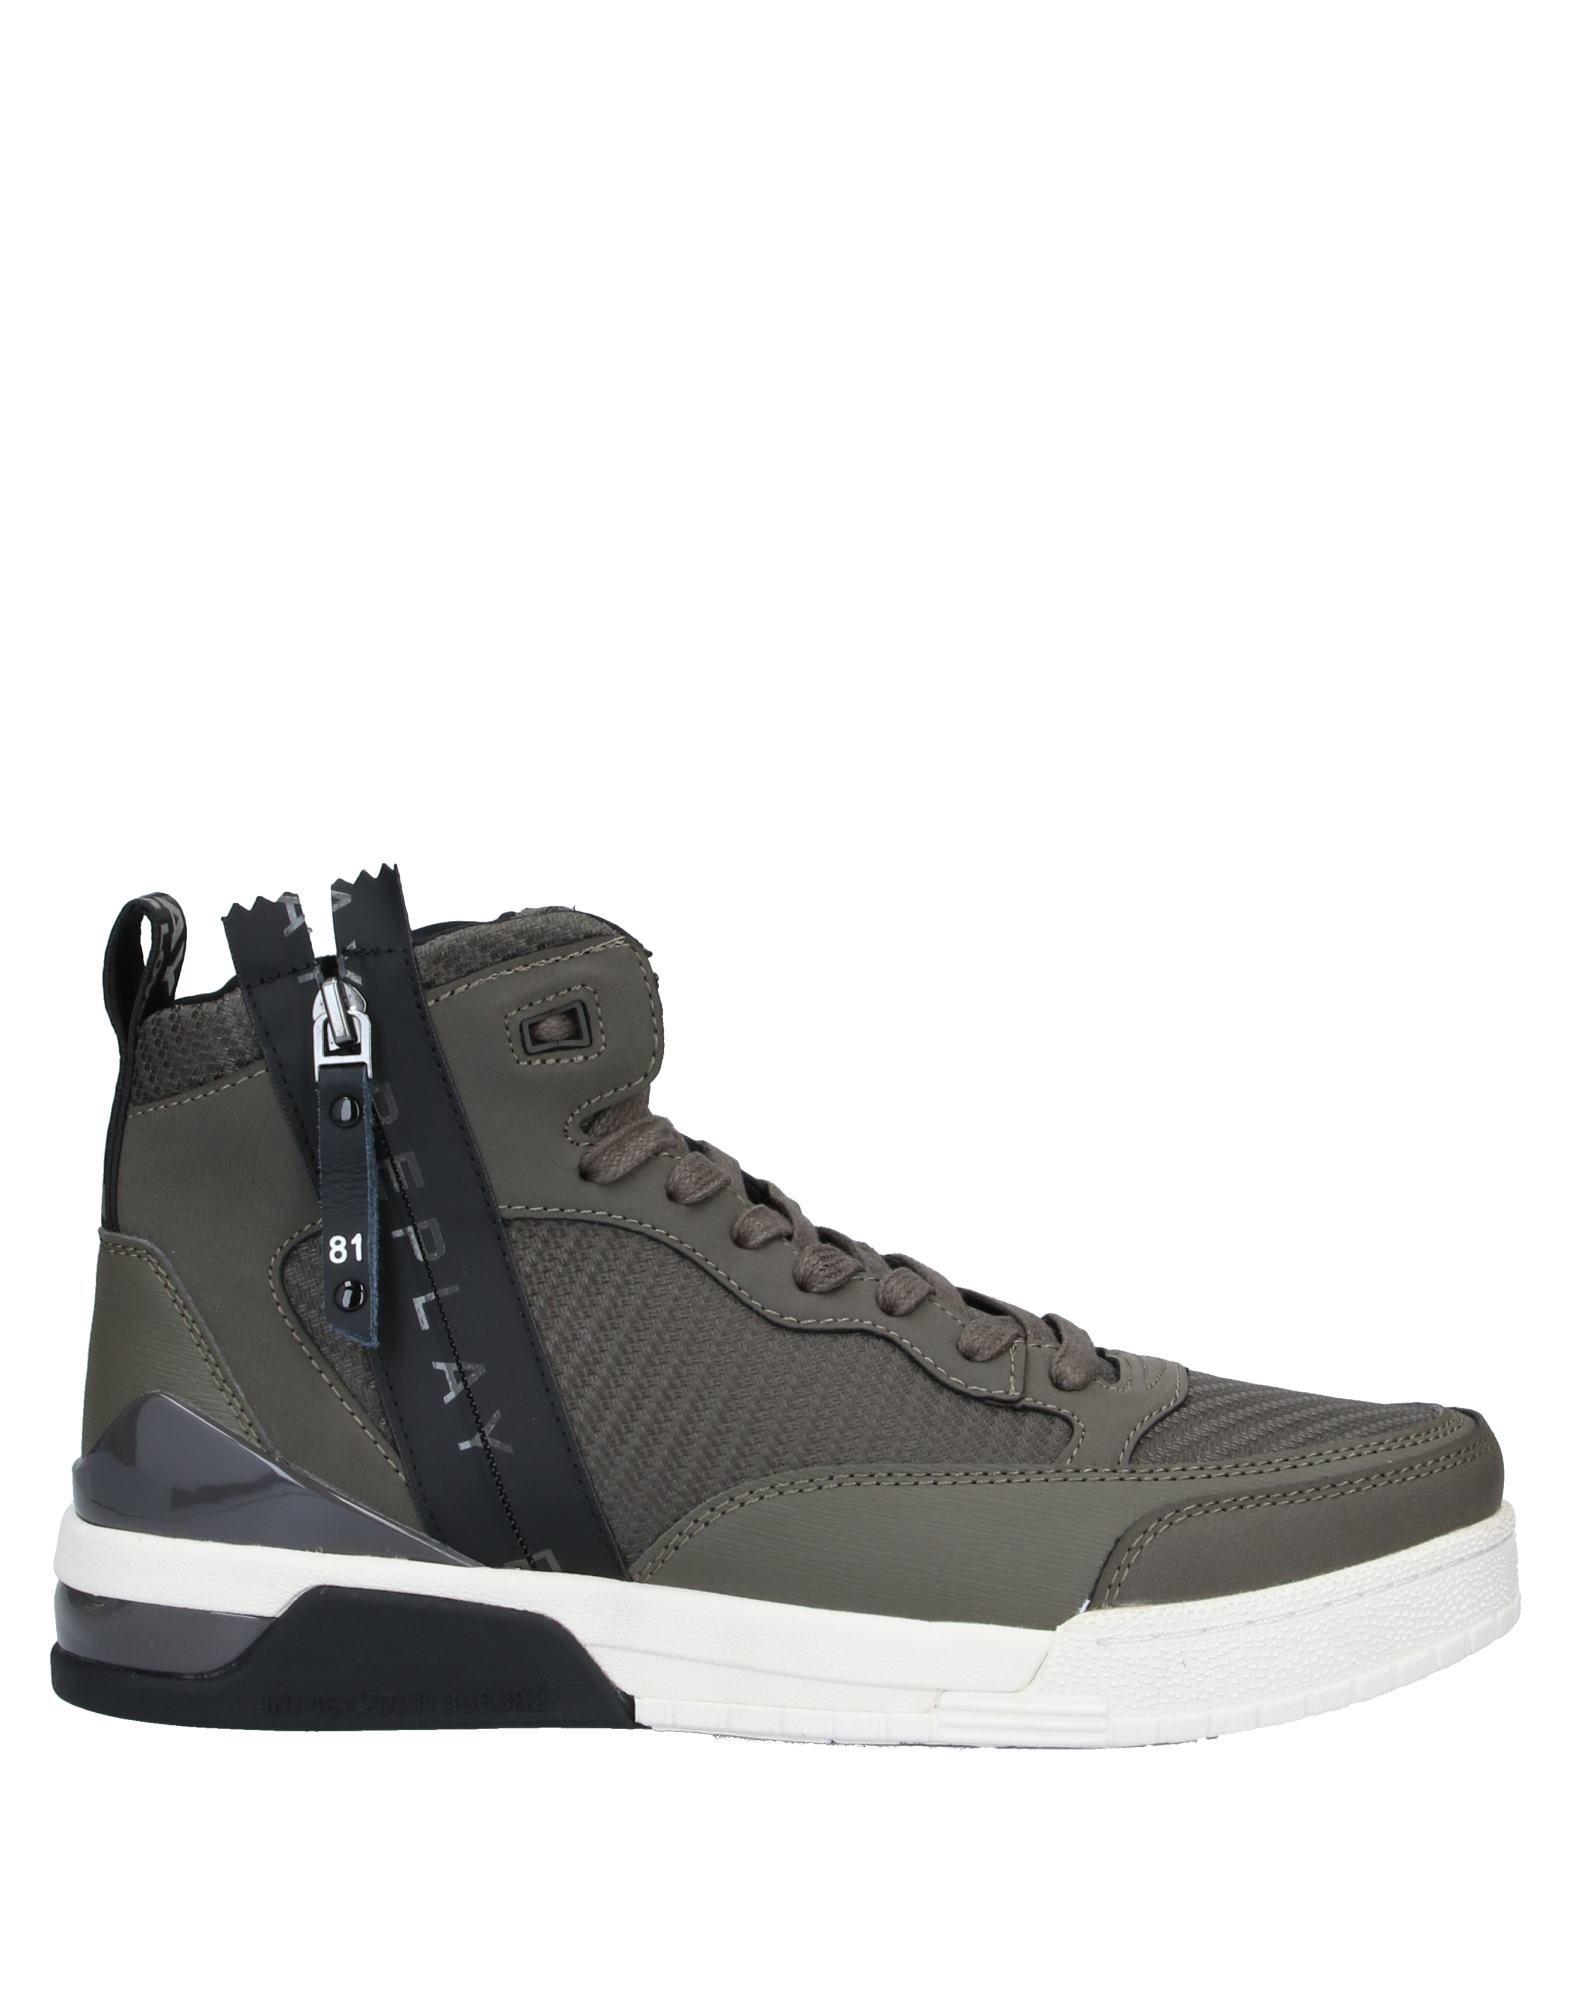 Replay High-tops & Sneakers for Men - Lyst